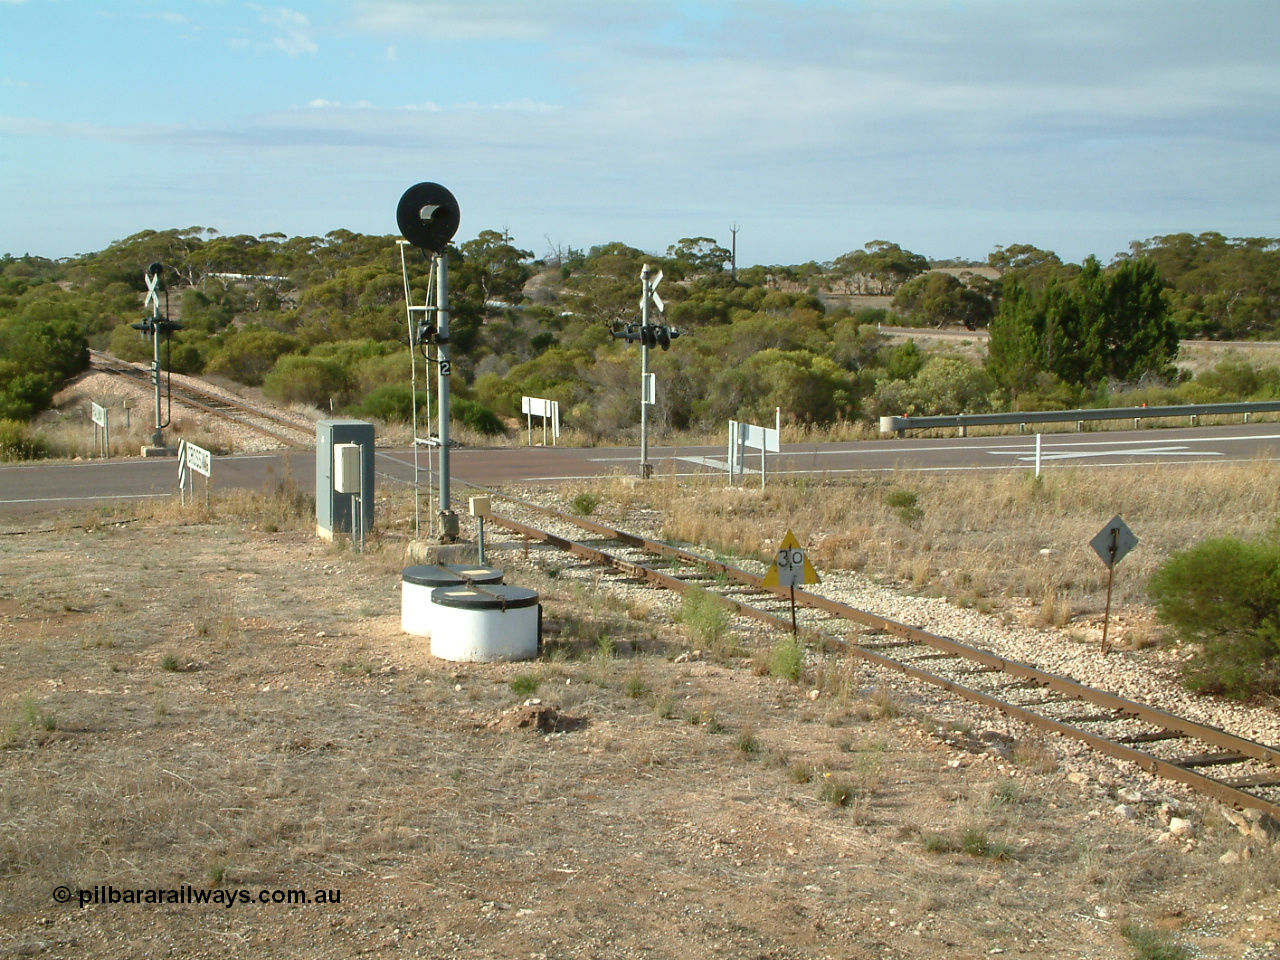 030409 083147
Kyancutta, view of the Eyre Highway grade crossing protected by 'F' type flashing lights, the searchlight signal 2 is one of only three on the Eyre Peninsula system, it is to allow Up trains to enter and shunt the yard.
